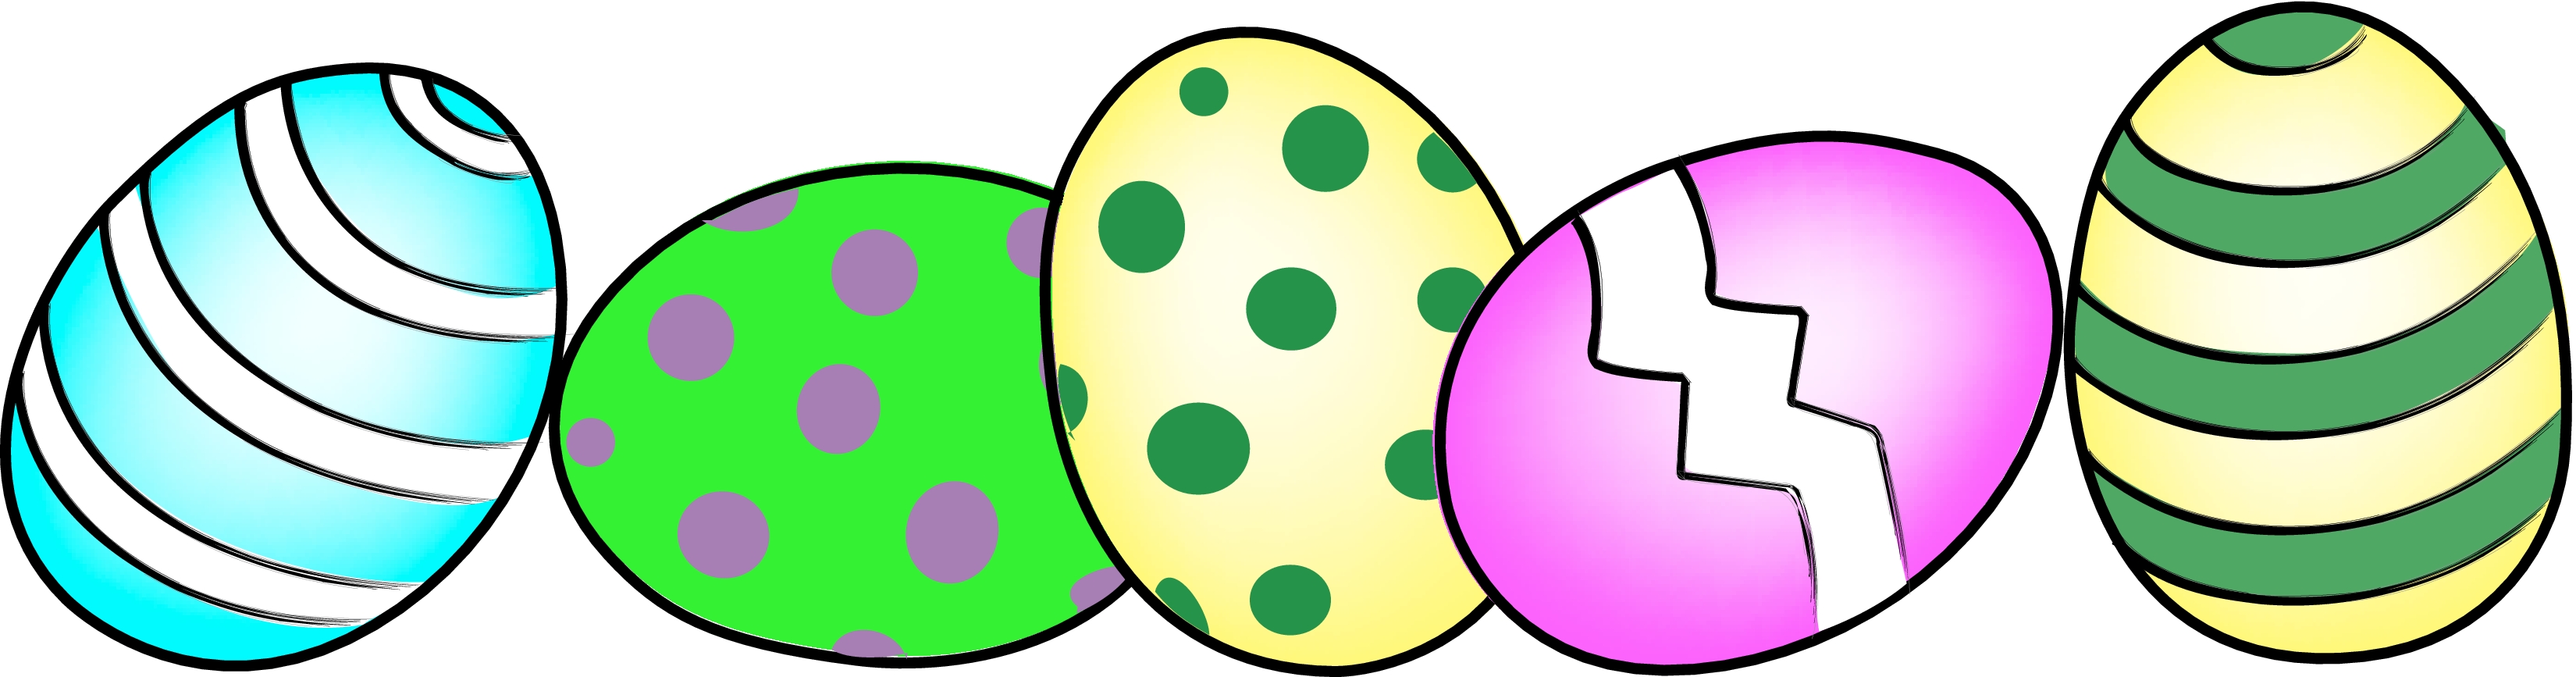 easter clipart free download - photo #14